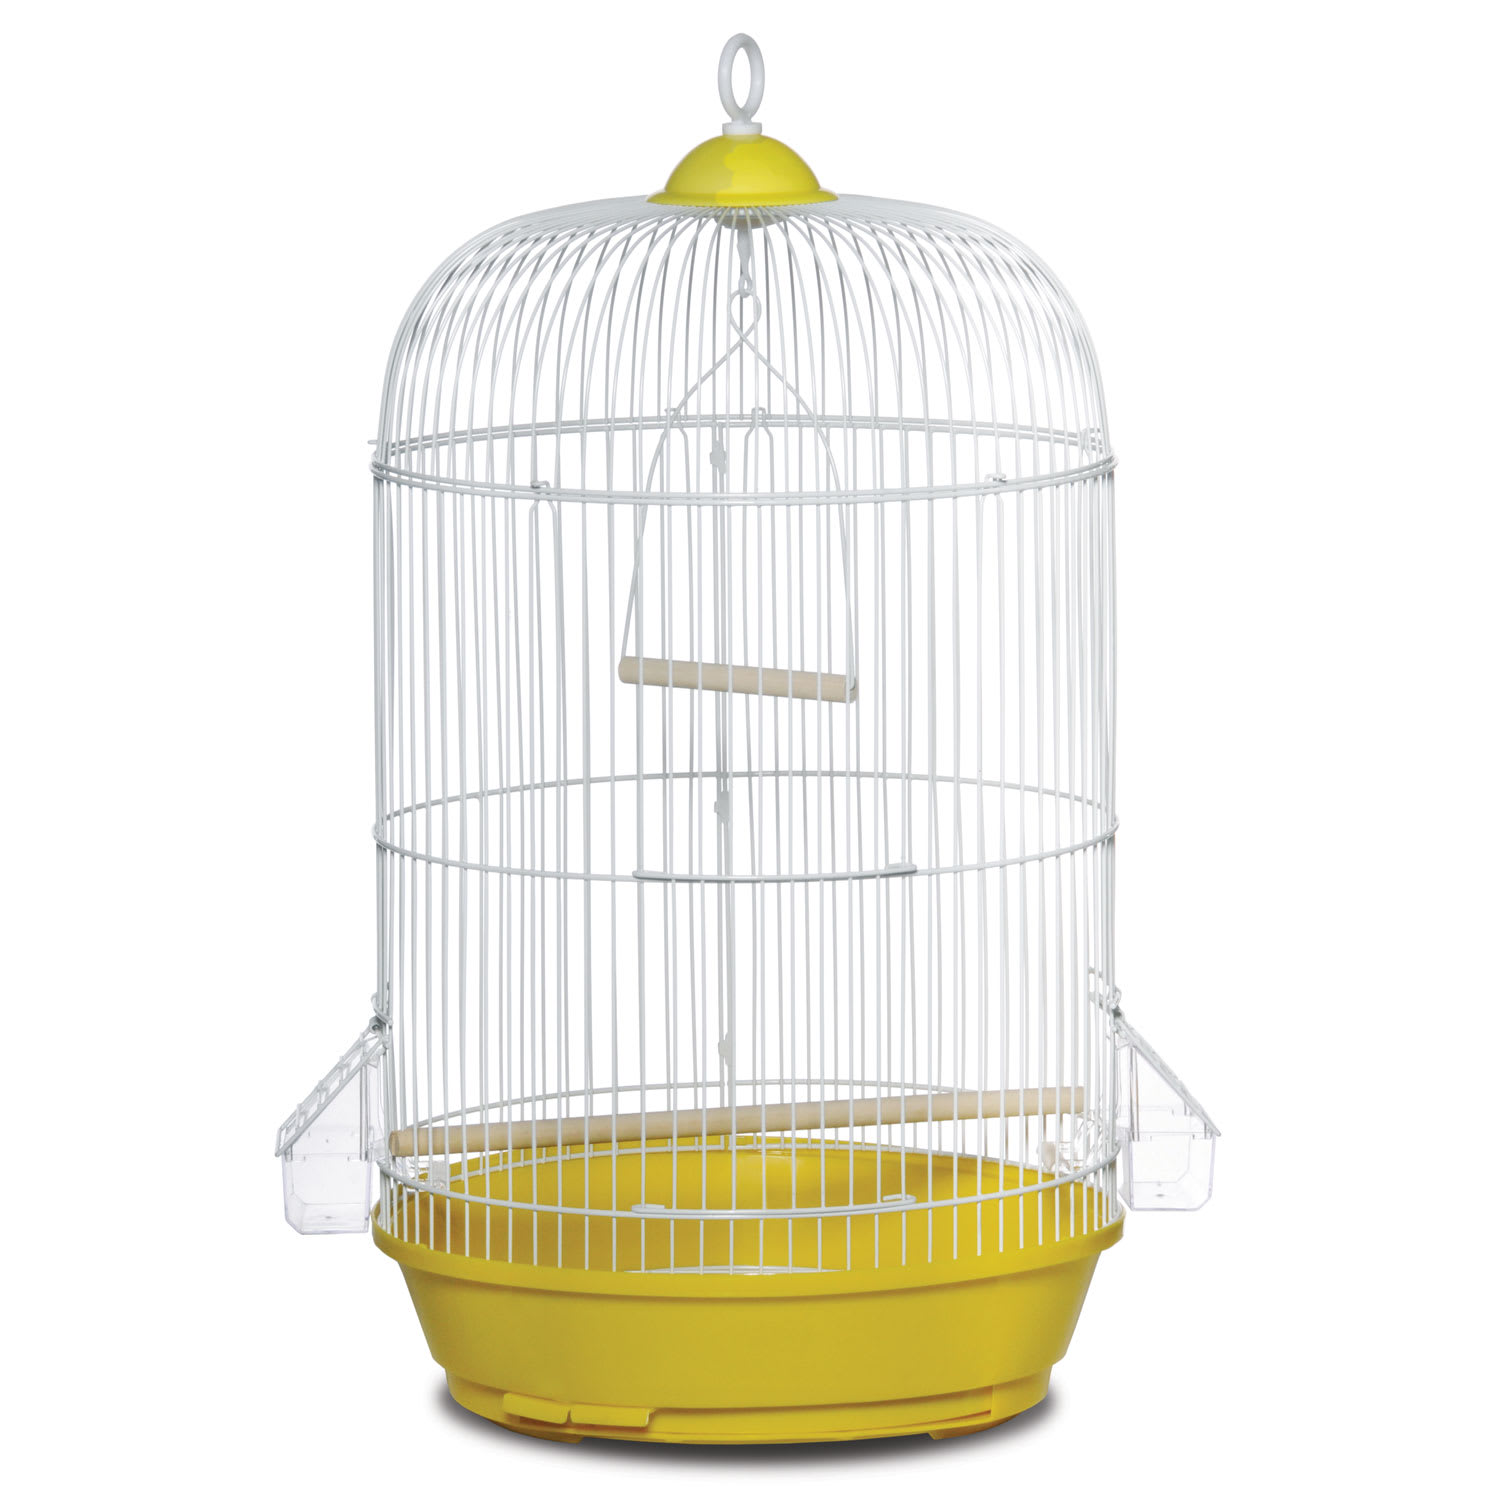 Prevue Pet Products Classic Round Yellow Bird Cage, 24